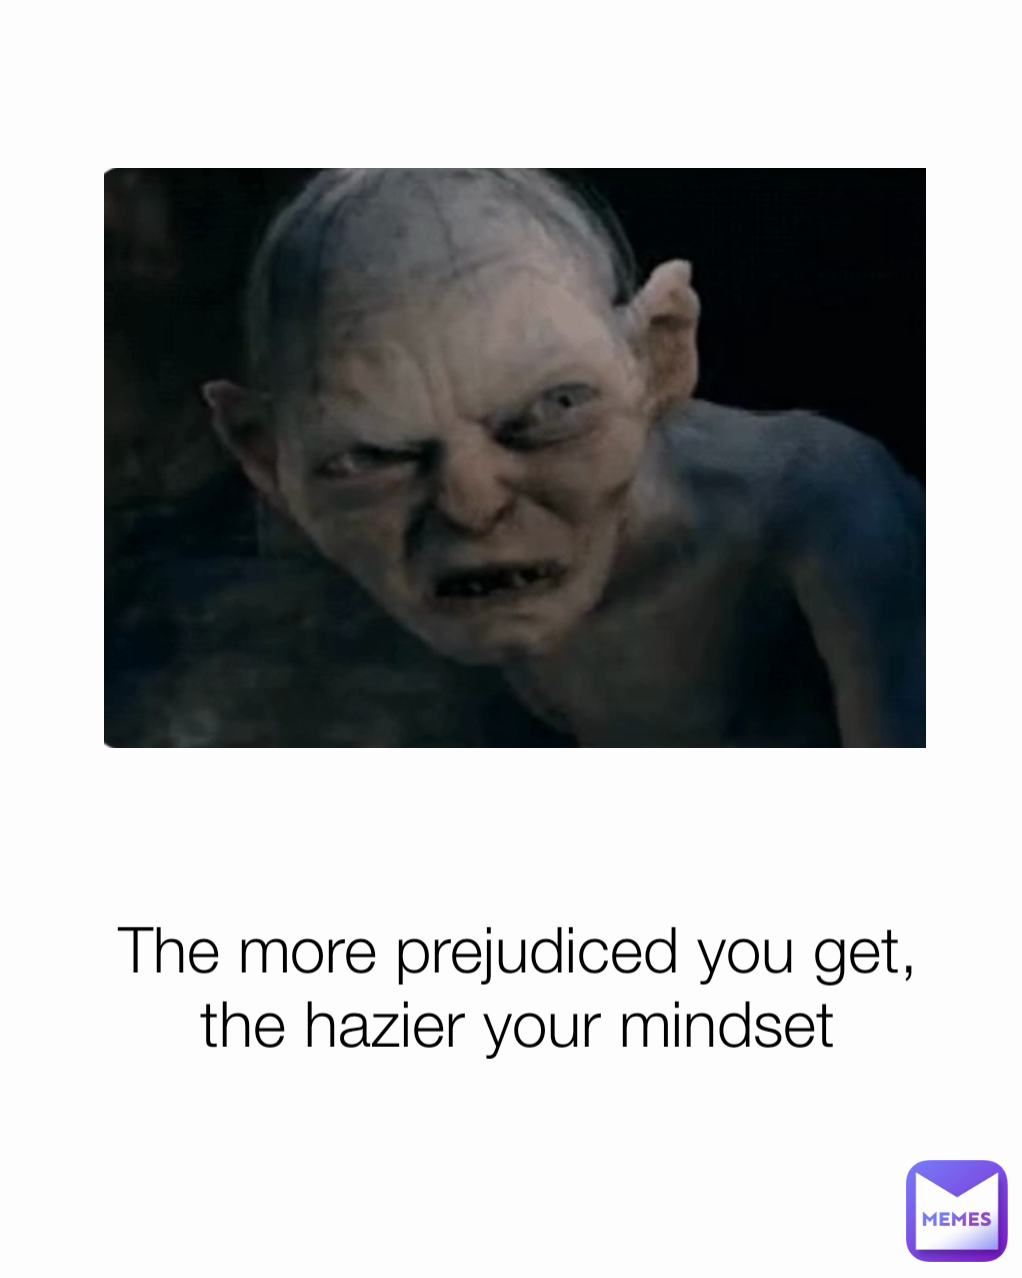 The more prejudiced you get, the hazier your mindset